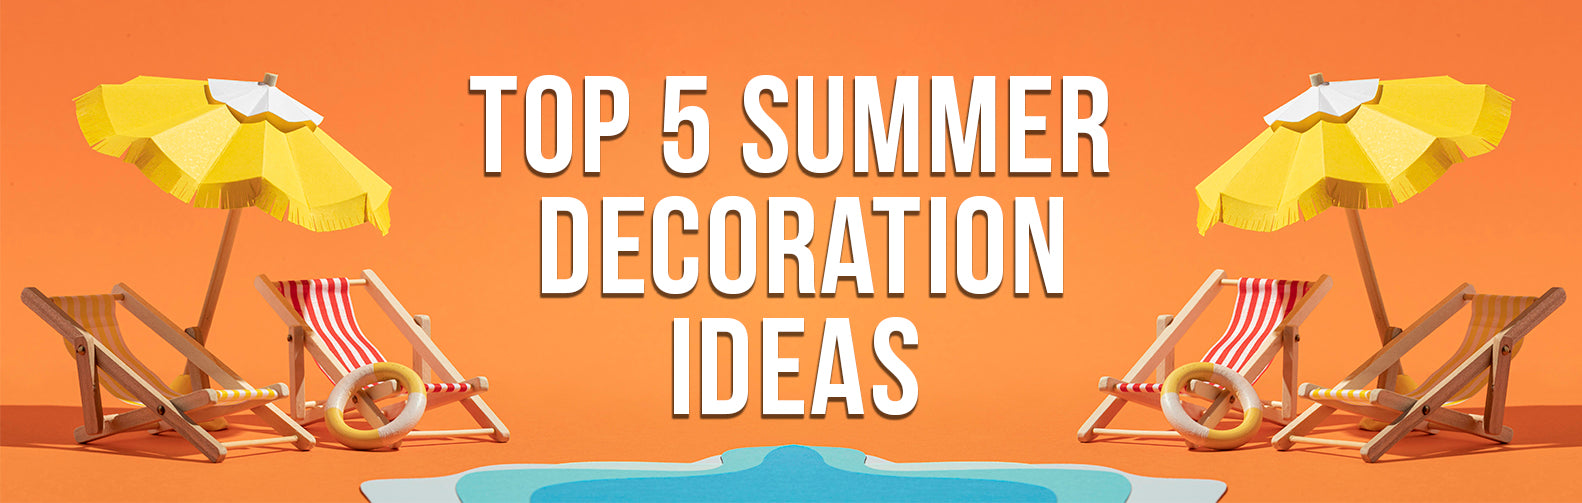 Top 5 Summer Decoration Ideas - Tiaracle